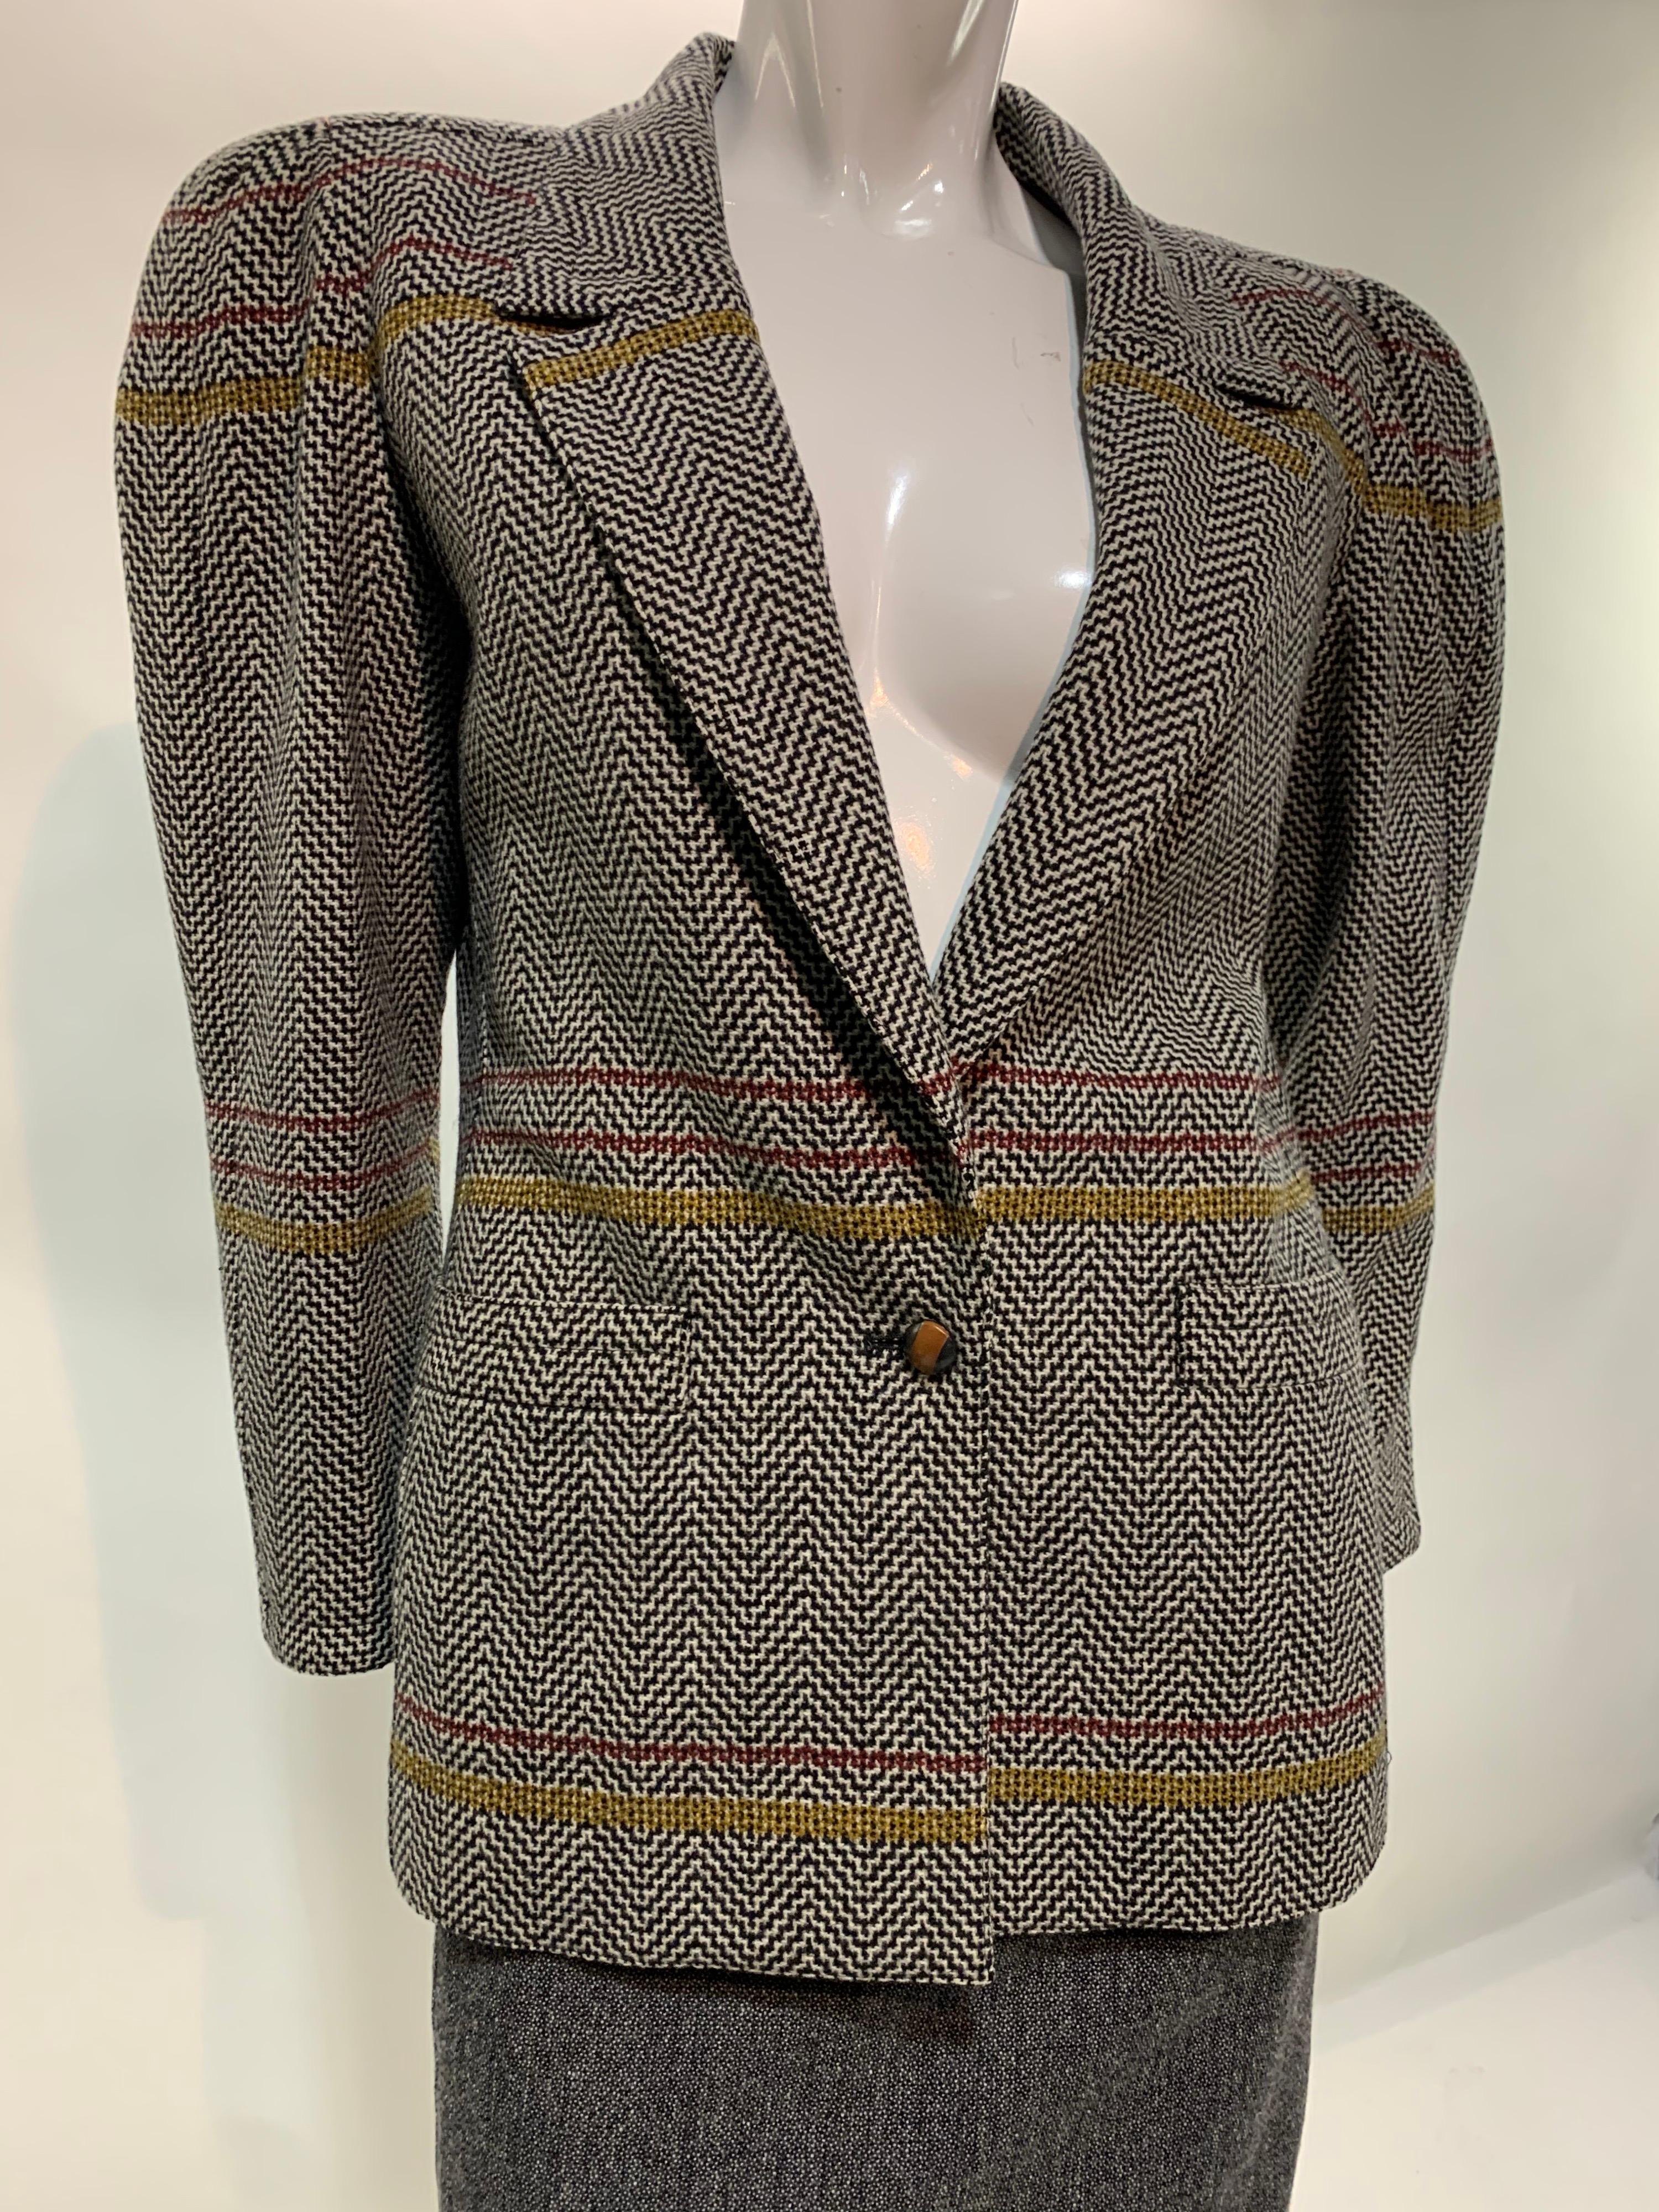 Women's 1980 Gianni Versace Mixed Tweed Skirt Suit w/ Structured Shoulder Silhouette For Sale